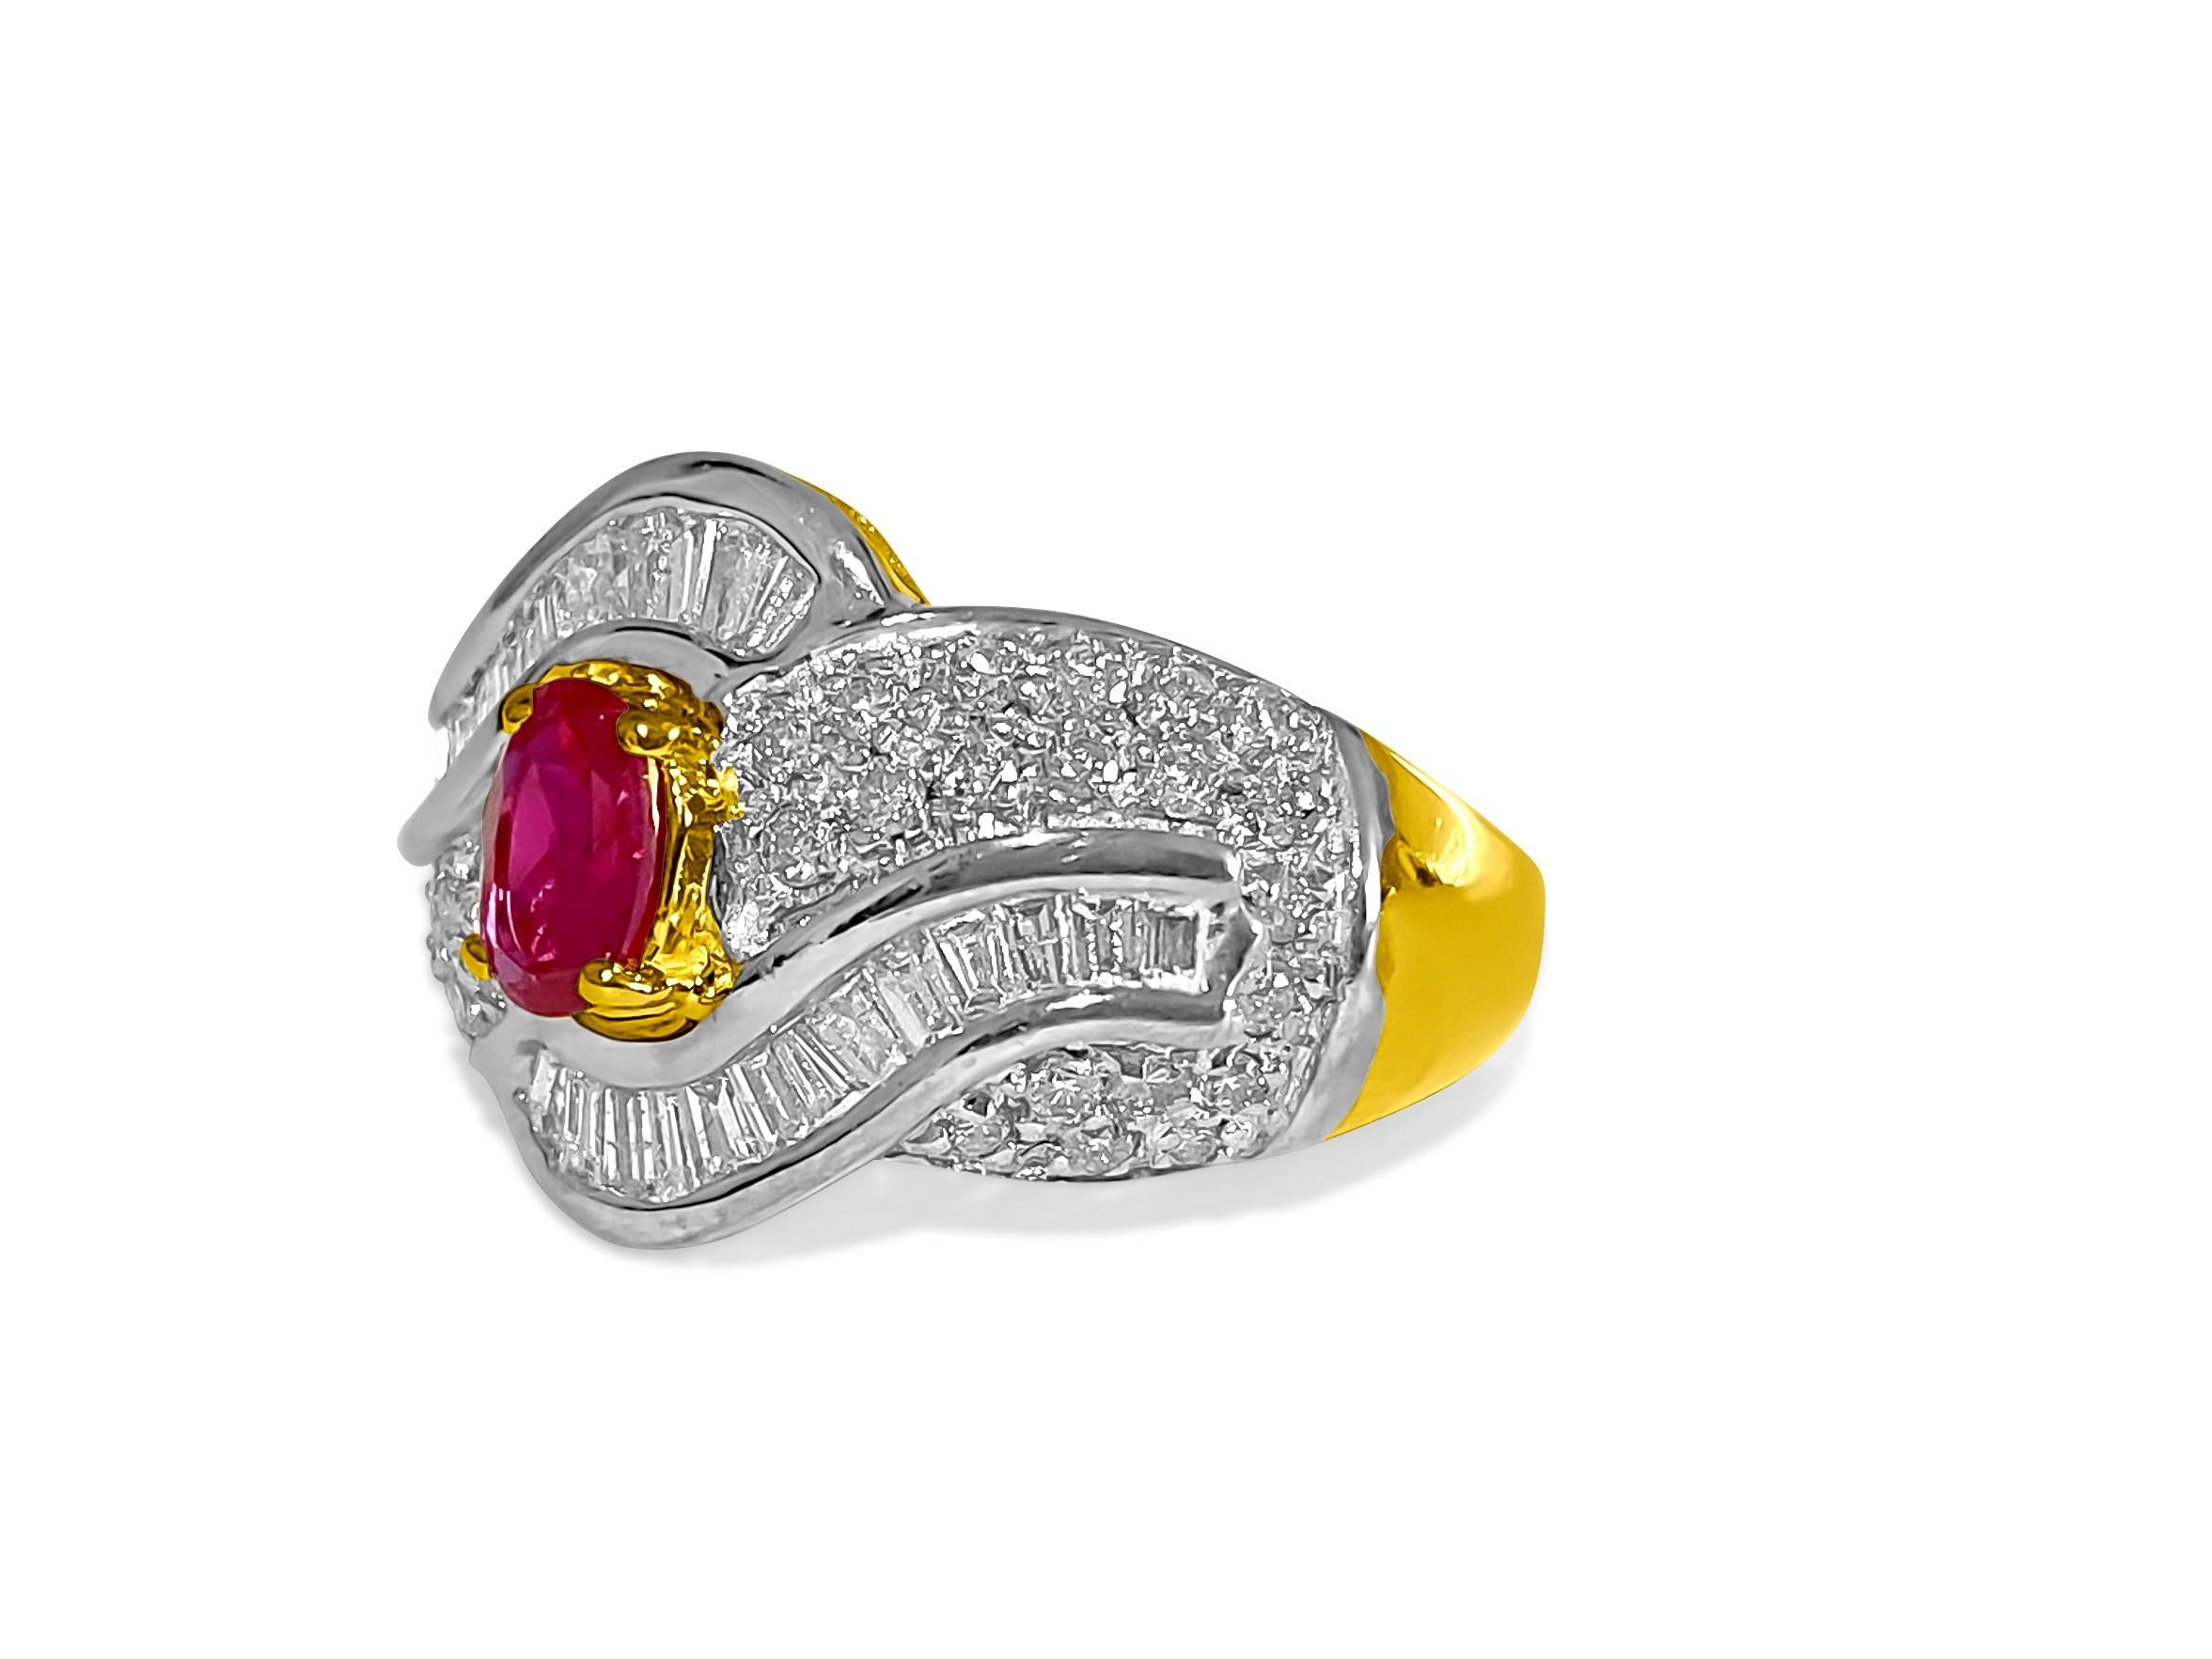 Metal: 14k yellow and white gold. Two tone. 
Oval cut, 1.00 carat ruby. 100% natural earth mined ruby set in prongs. 
1.70 carat diamonds, round brilliant cut set in prongs. Clarity: VS-SI. Color: G. 100% natural and genuine earth mined diamonds.